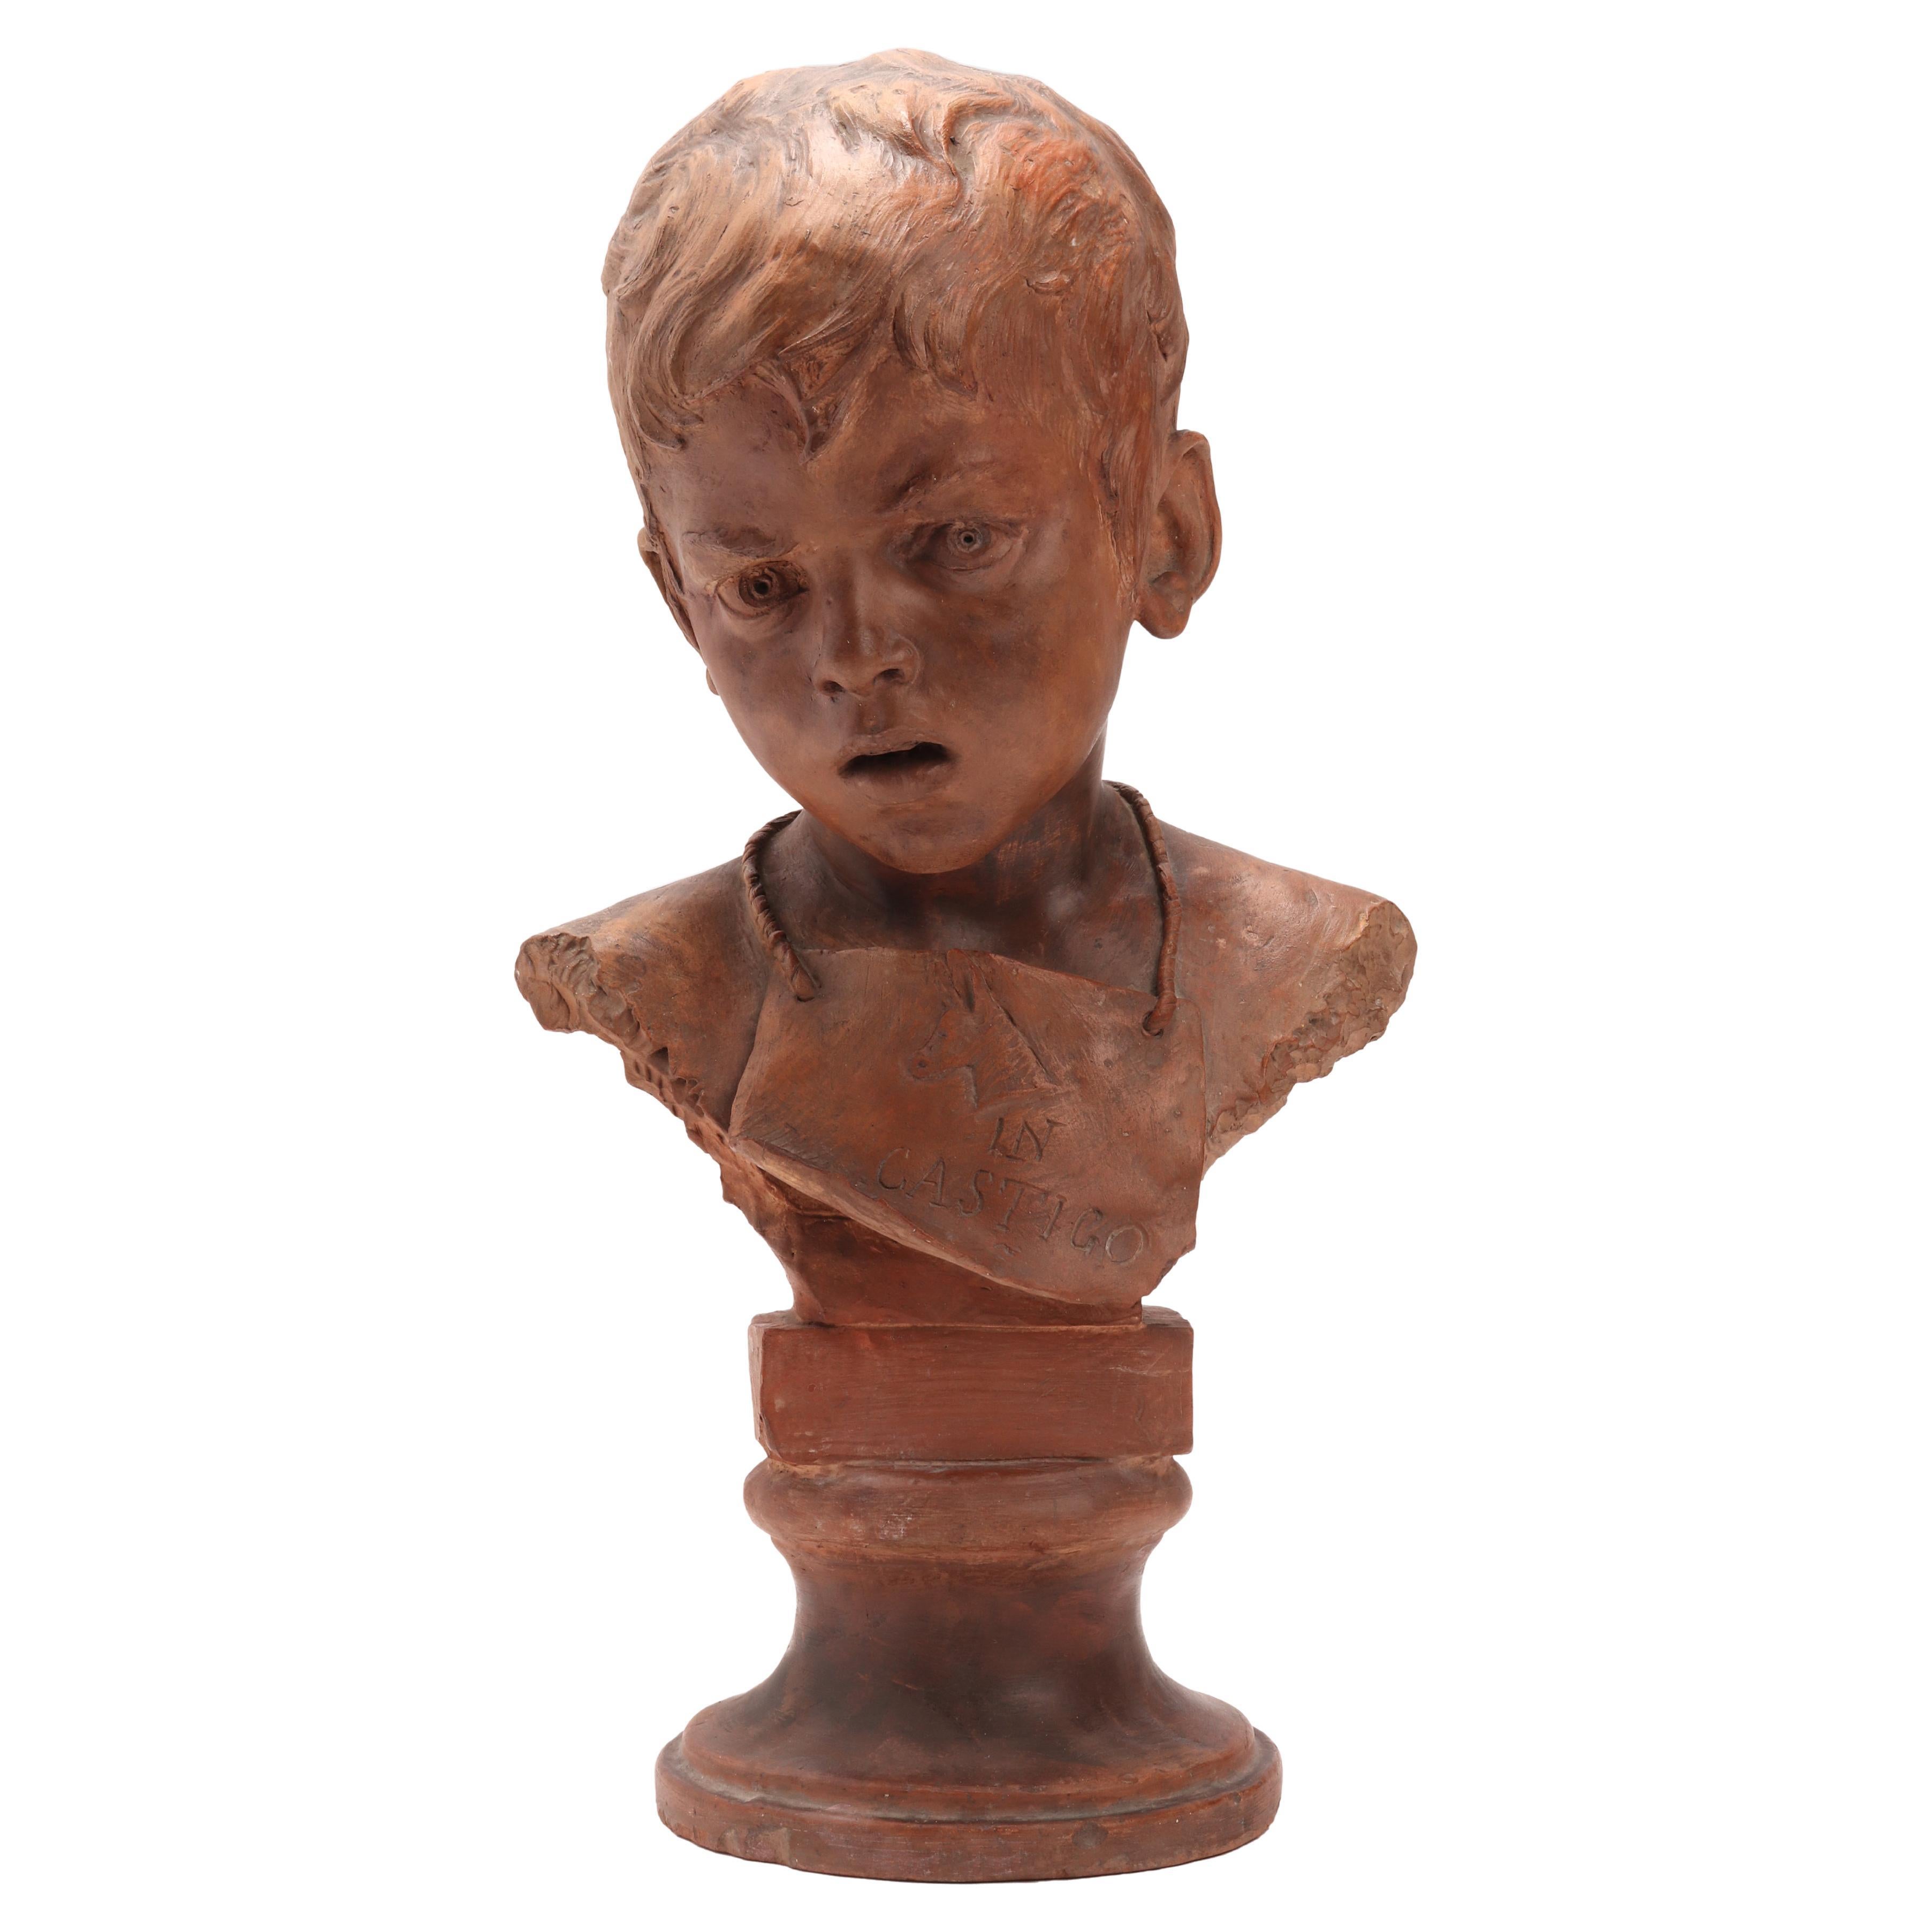 Head of a Young Roguish Child by Francesco Griffo, Italy 1900